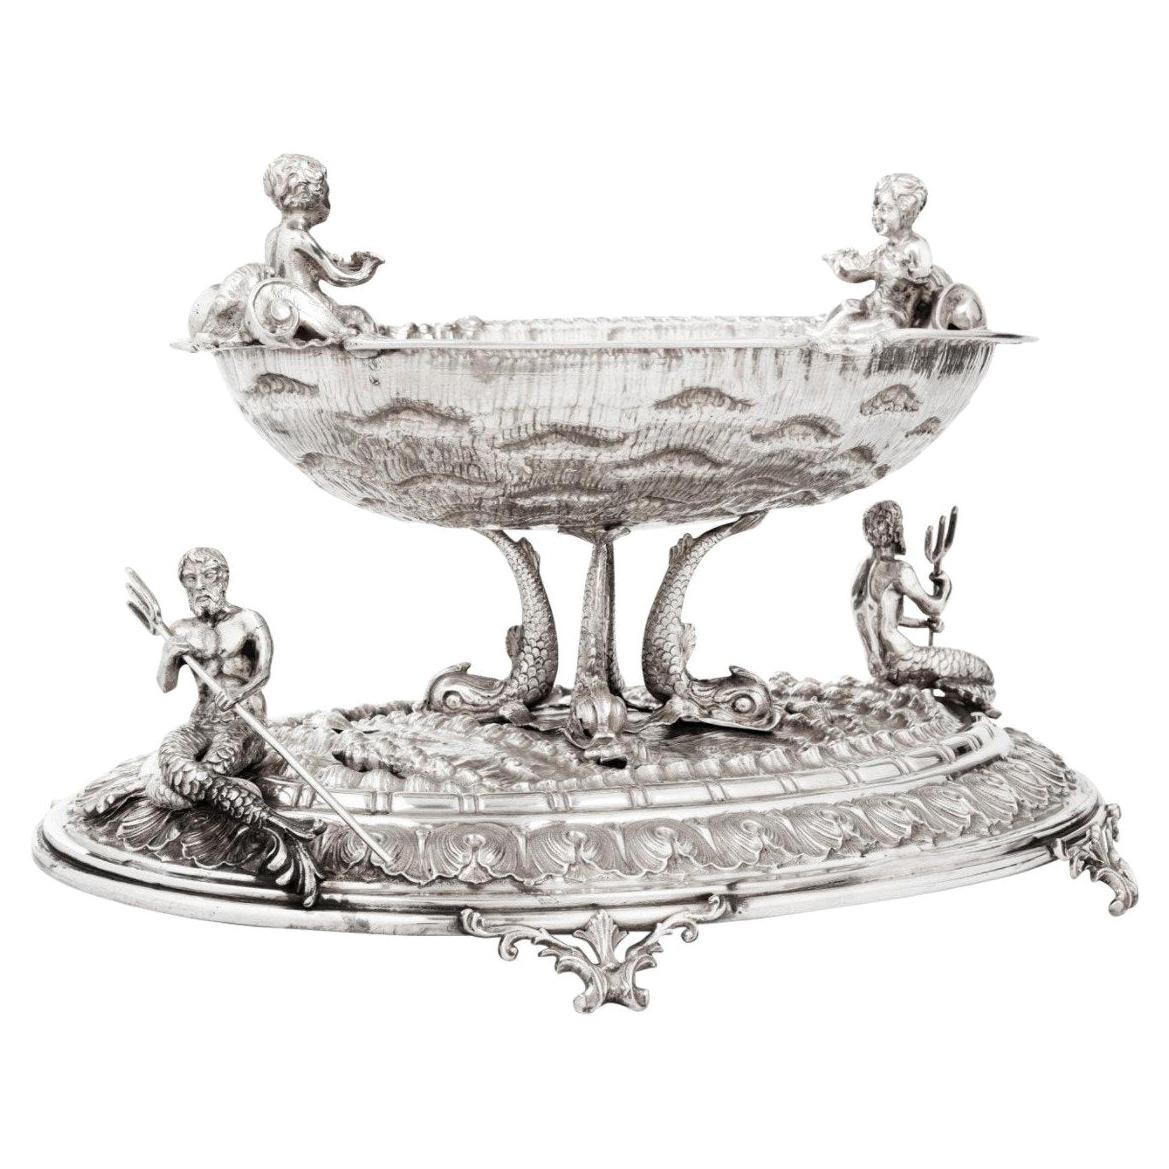 Exceptional Nautical Themed Silver Centerpiece by Buccellati For Sale